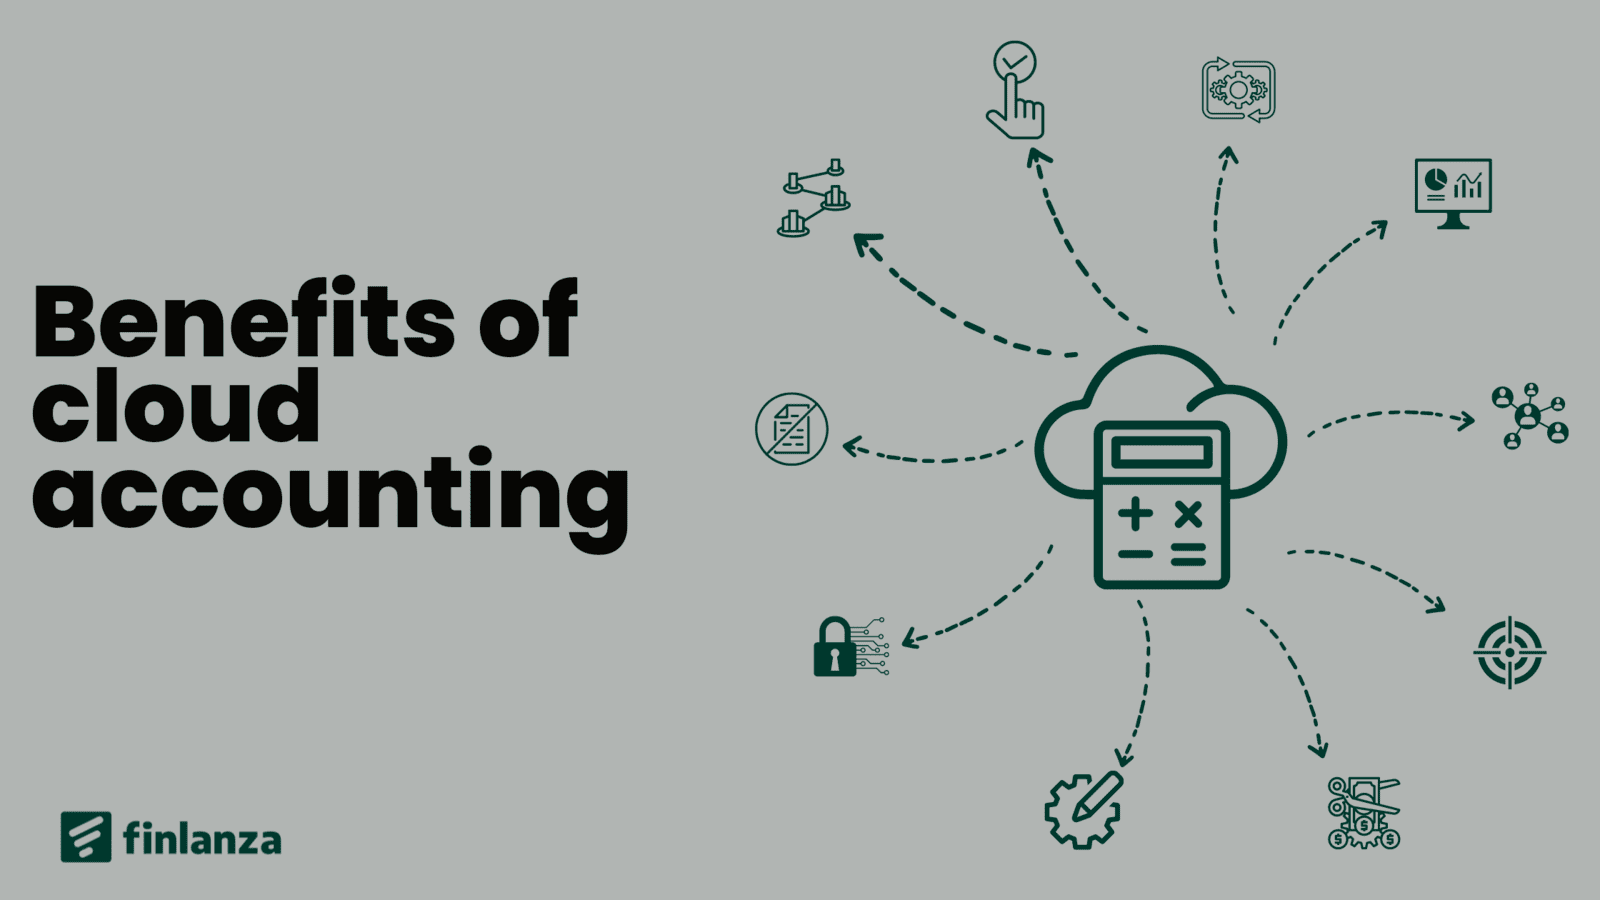 10 benefits of cloud accounting that will transform your business